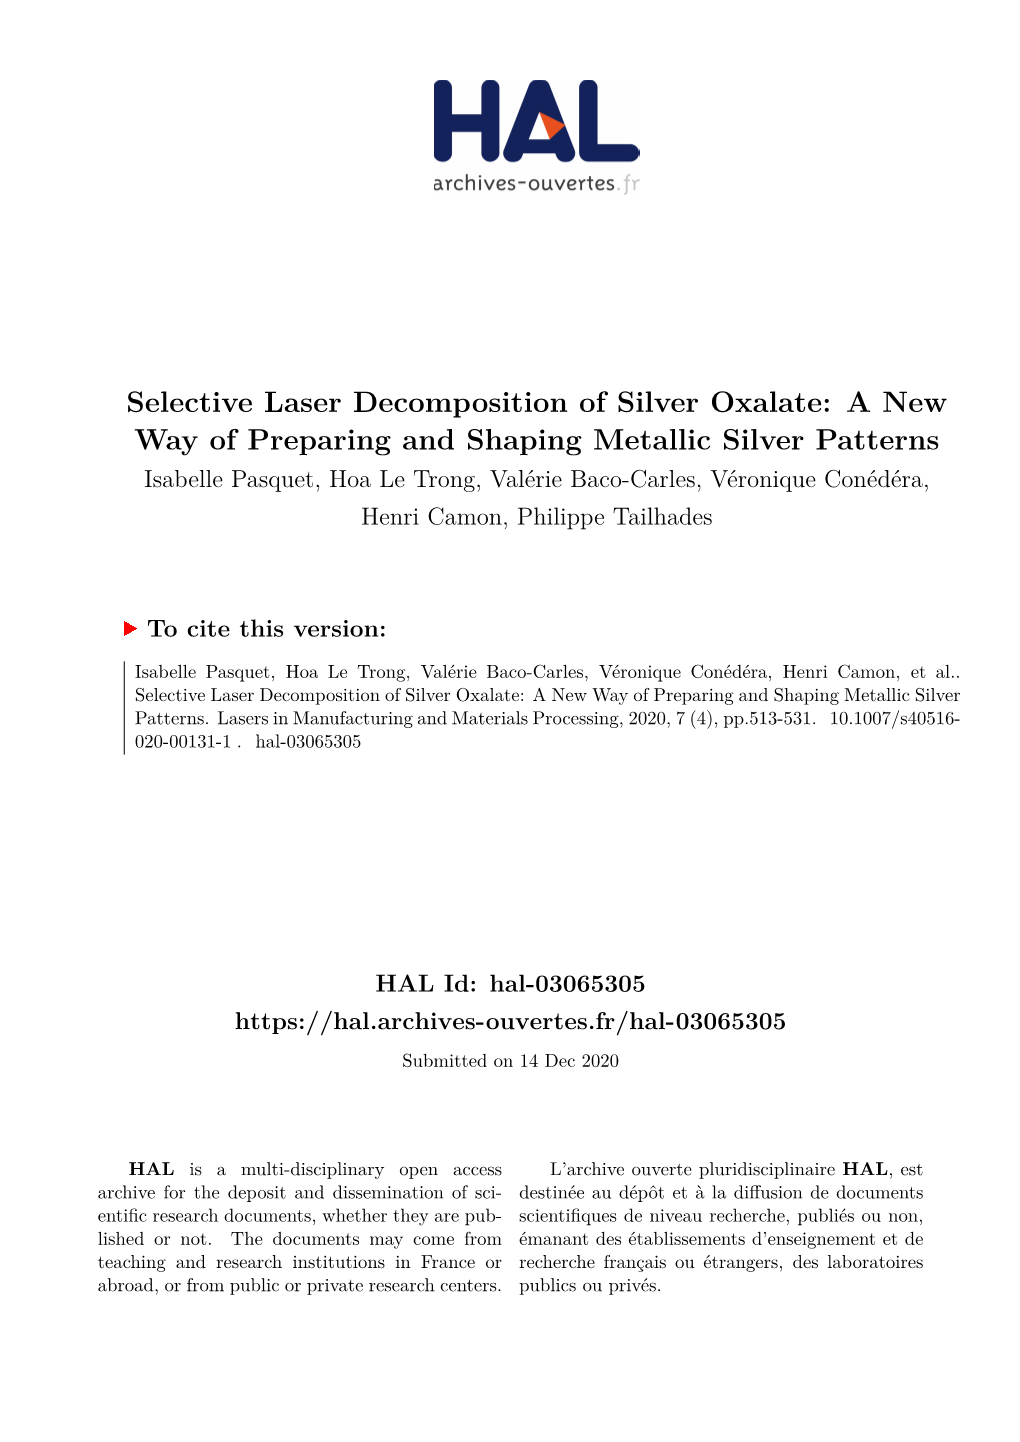 Selective Laser Decomposition of Silver Oxalate